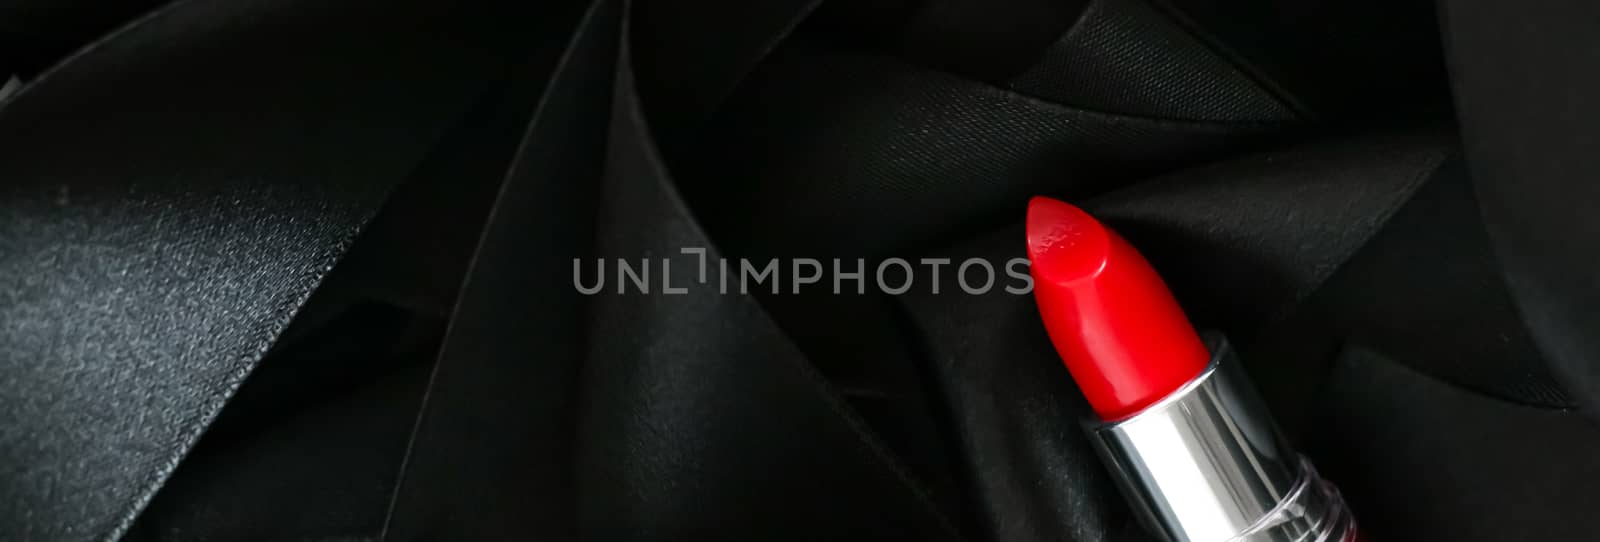 Red lipstick on black silk background, luxury make-up and beauty cosmetics